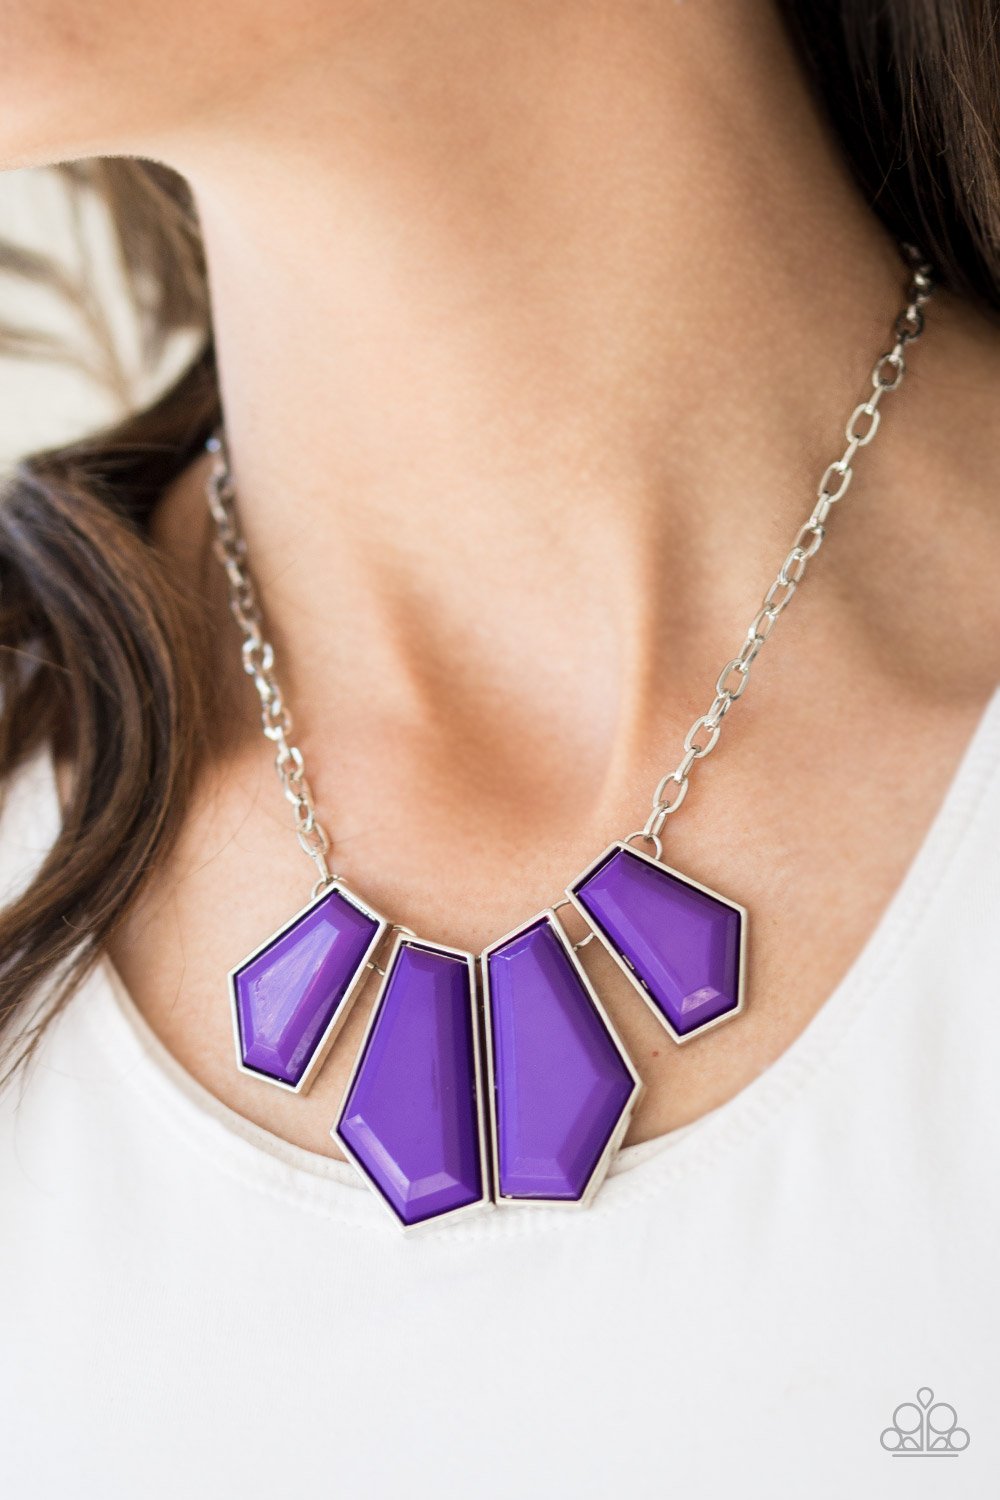 Get Up and GEO - purple necklace